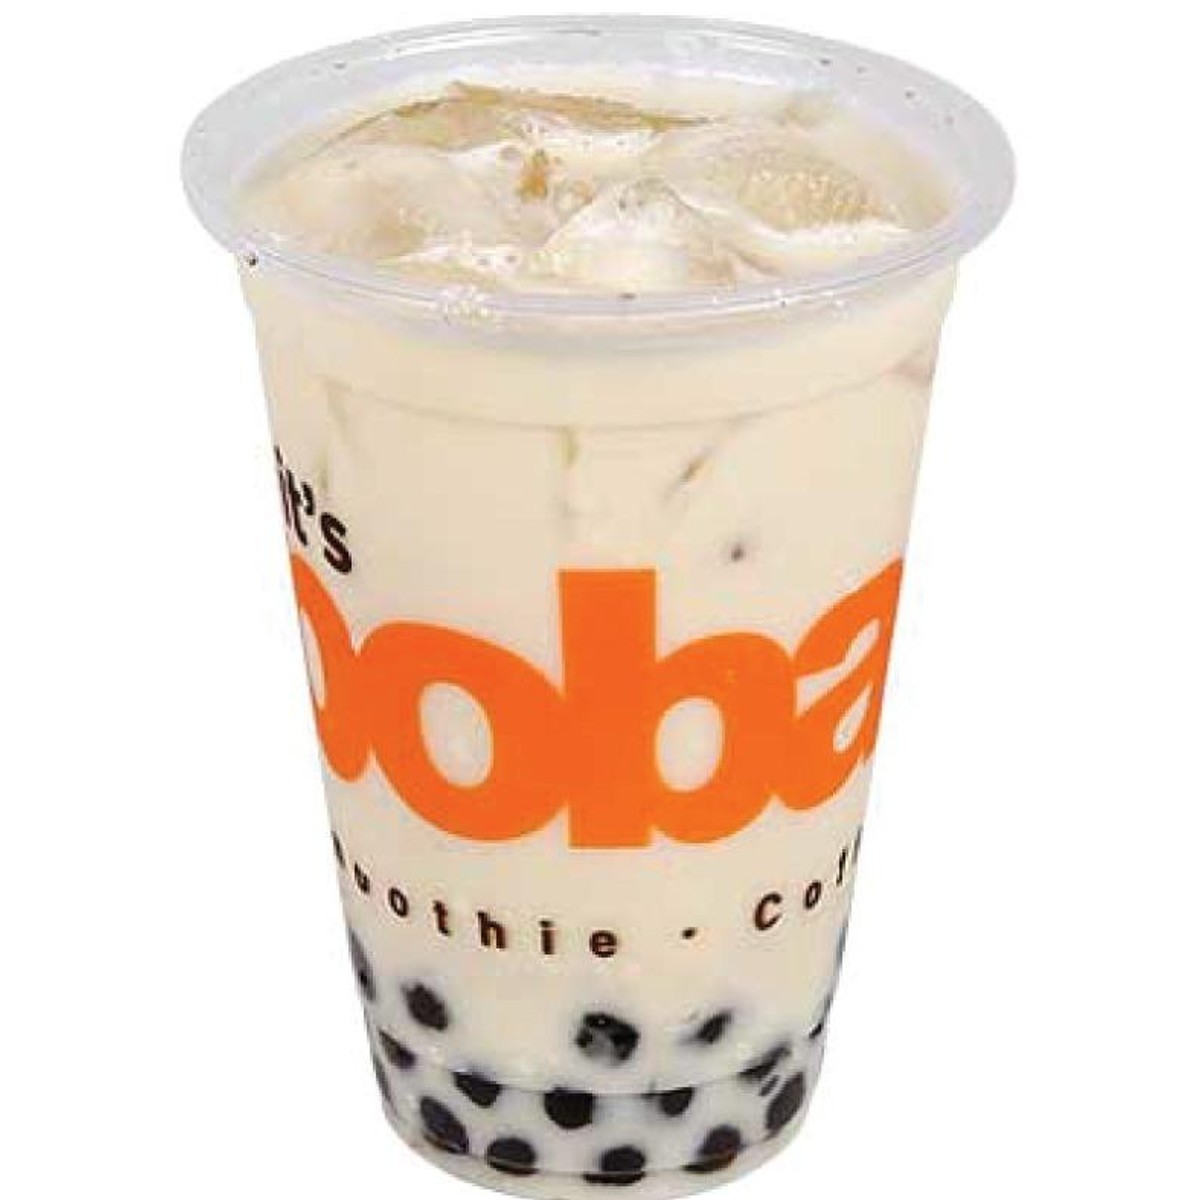 Fat Straws adds a Latin-inspired horchata bubble tea drink to its extensive  menu